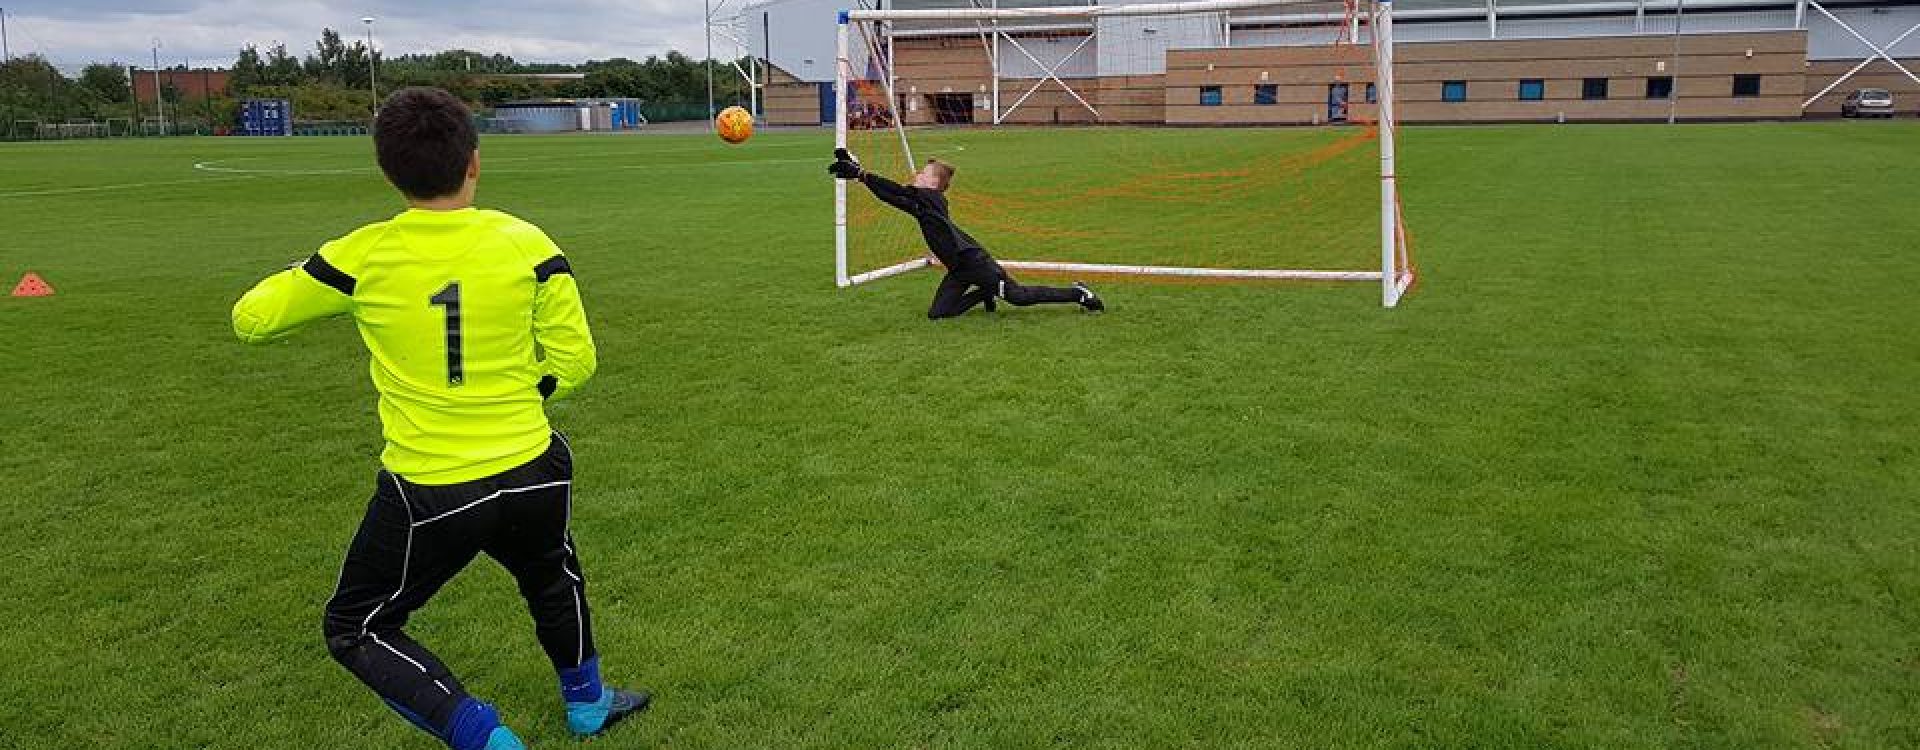 Goalkeeper making a save on the Community Pitch